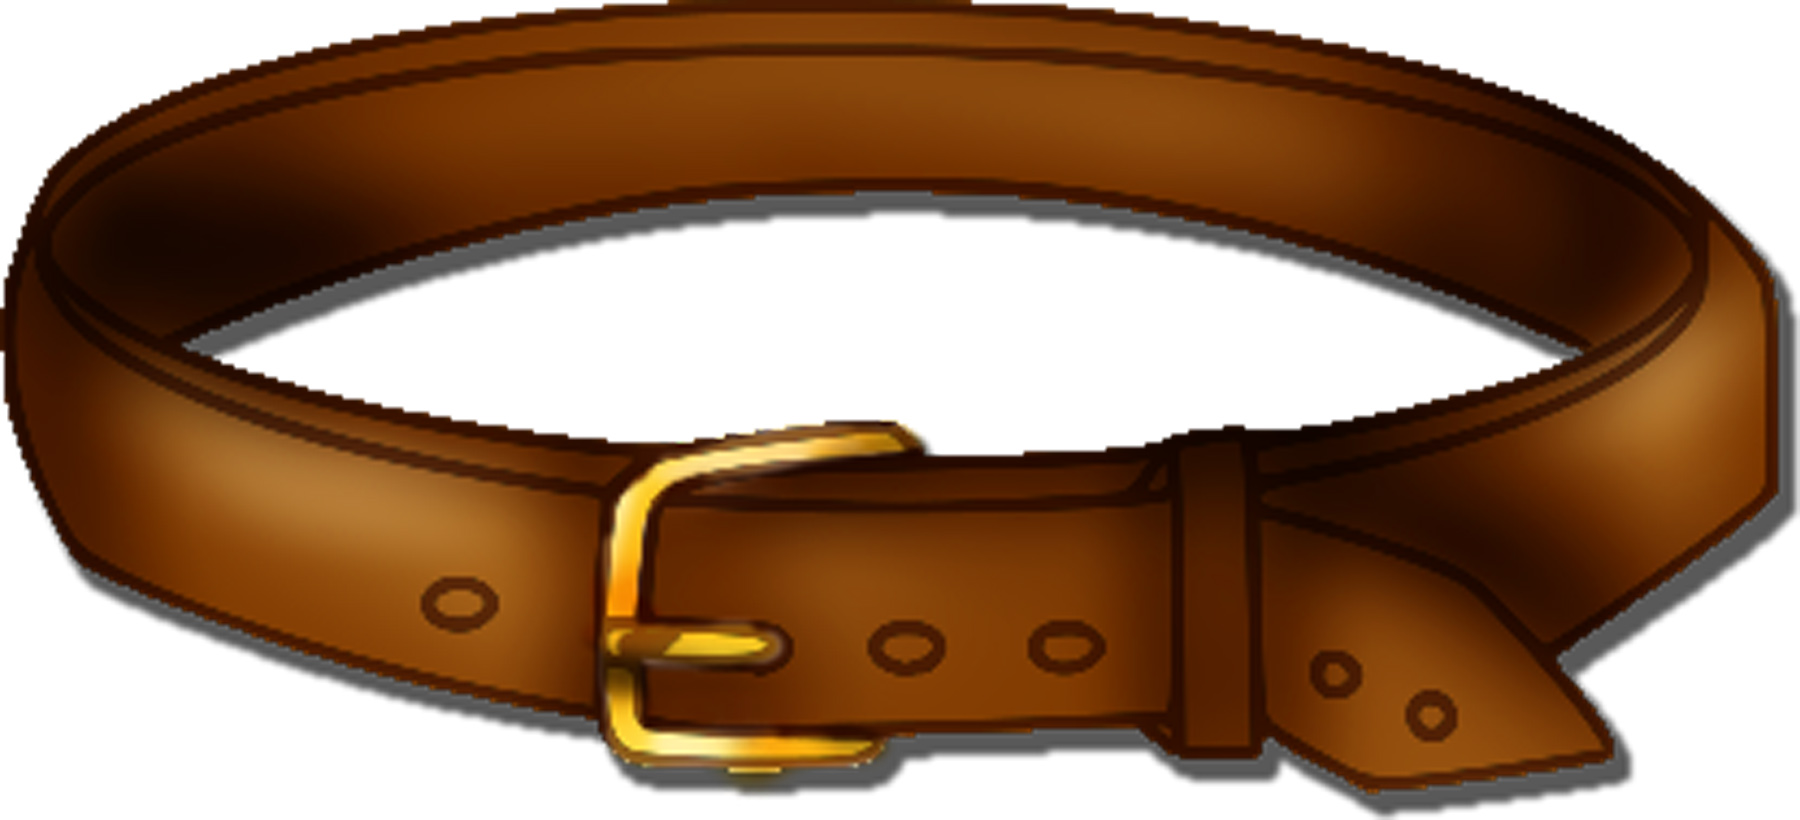 Belt clipart #10, Download drawings